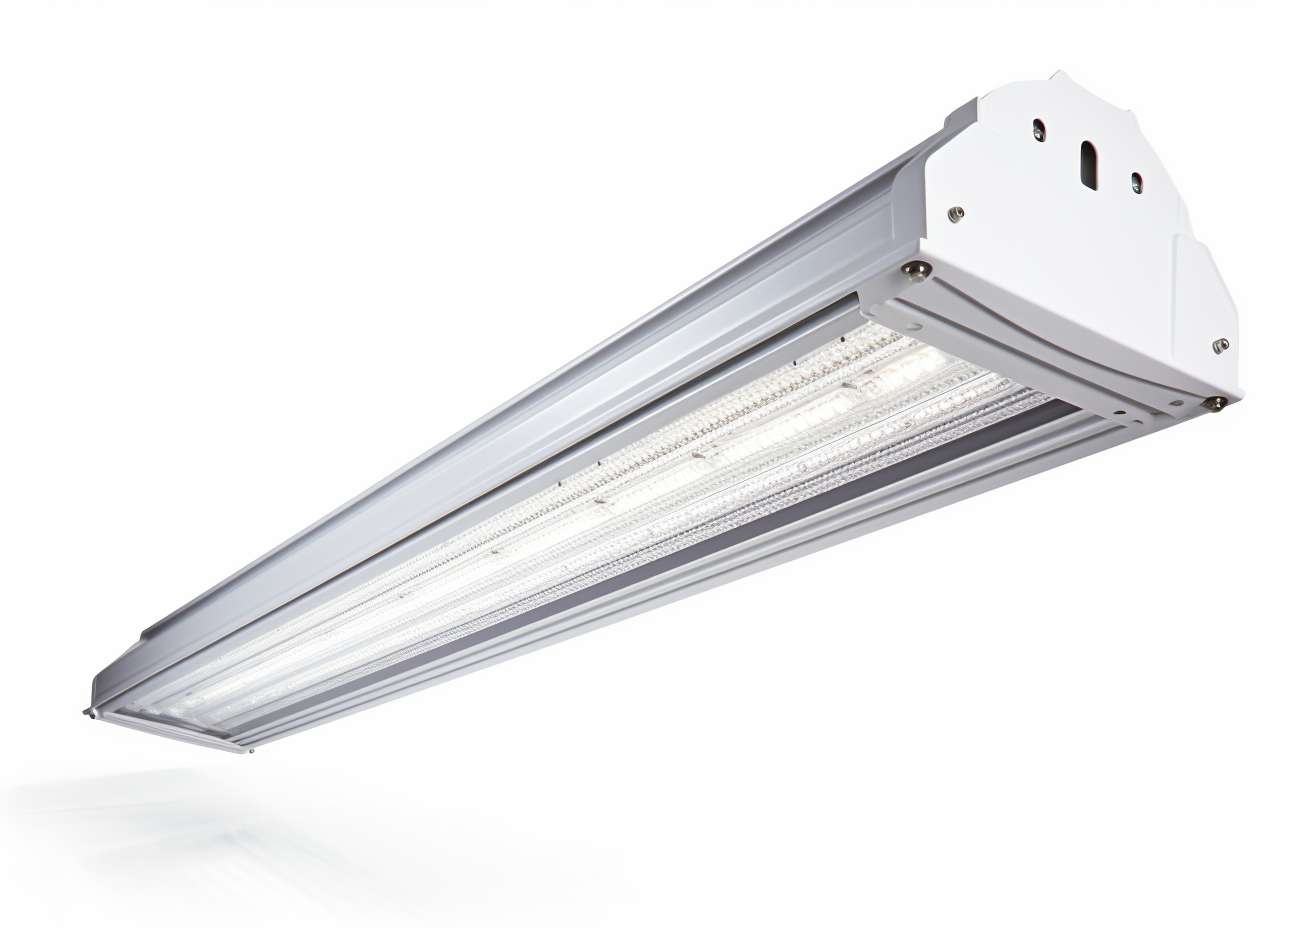 An industrial high bay led light fixture on a white background.